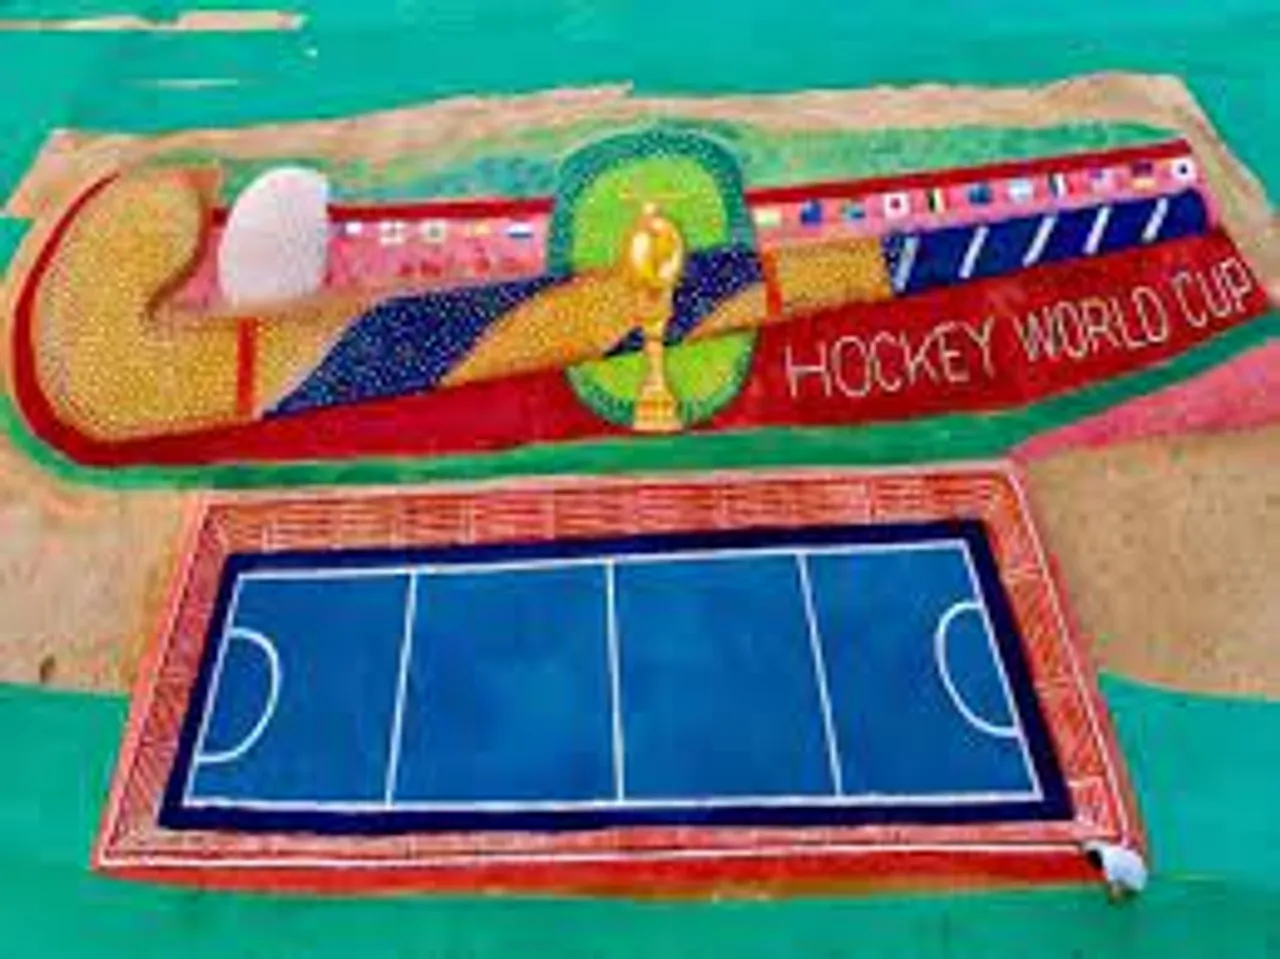 Sudarsan Pattnaik's sculpture recognised as 'world's largest sand hockey stick'